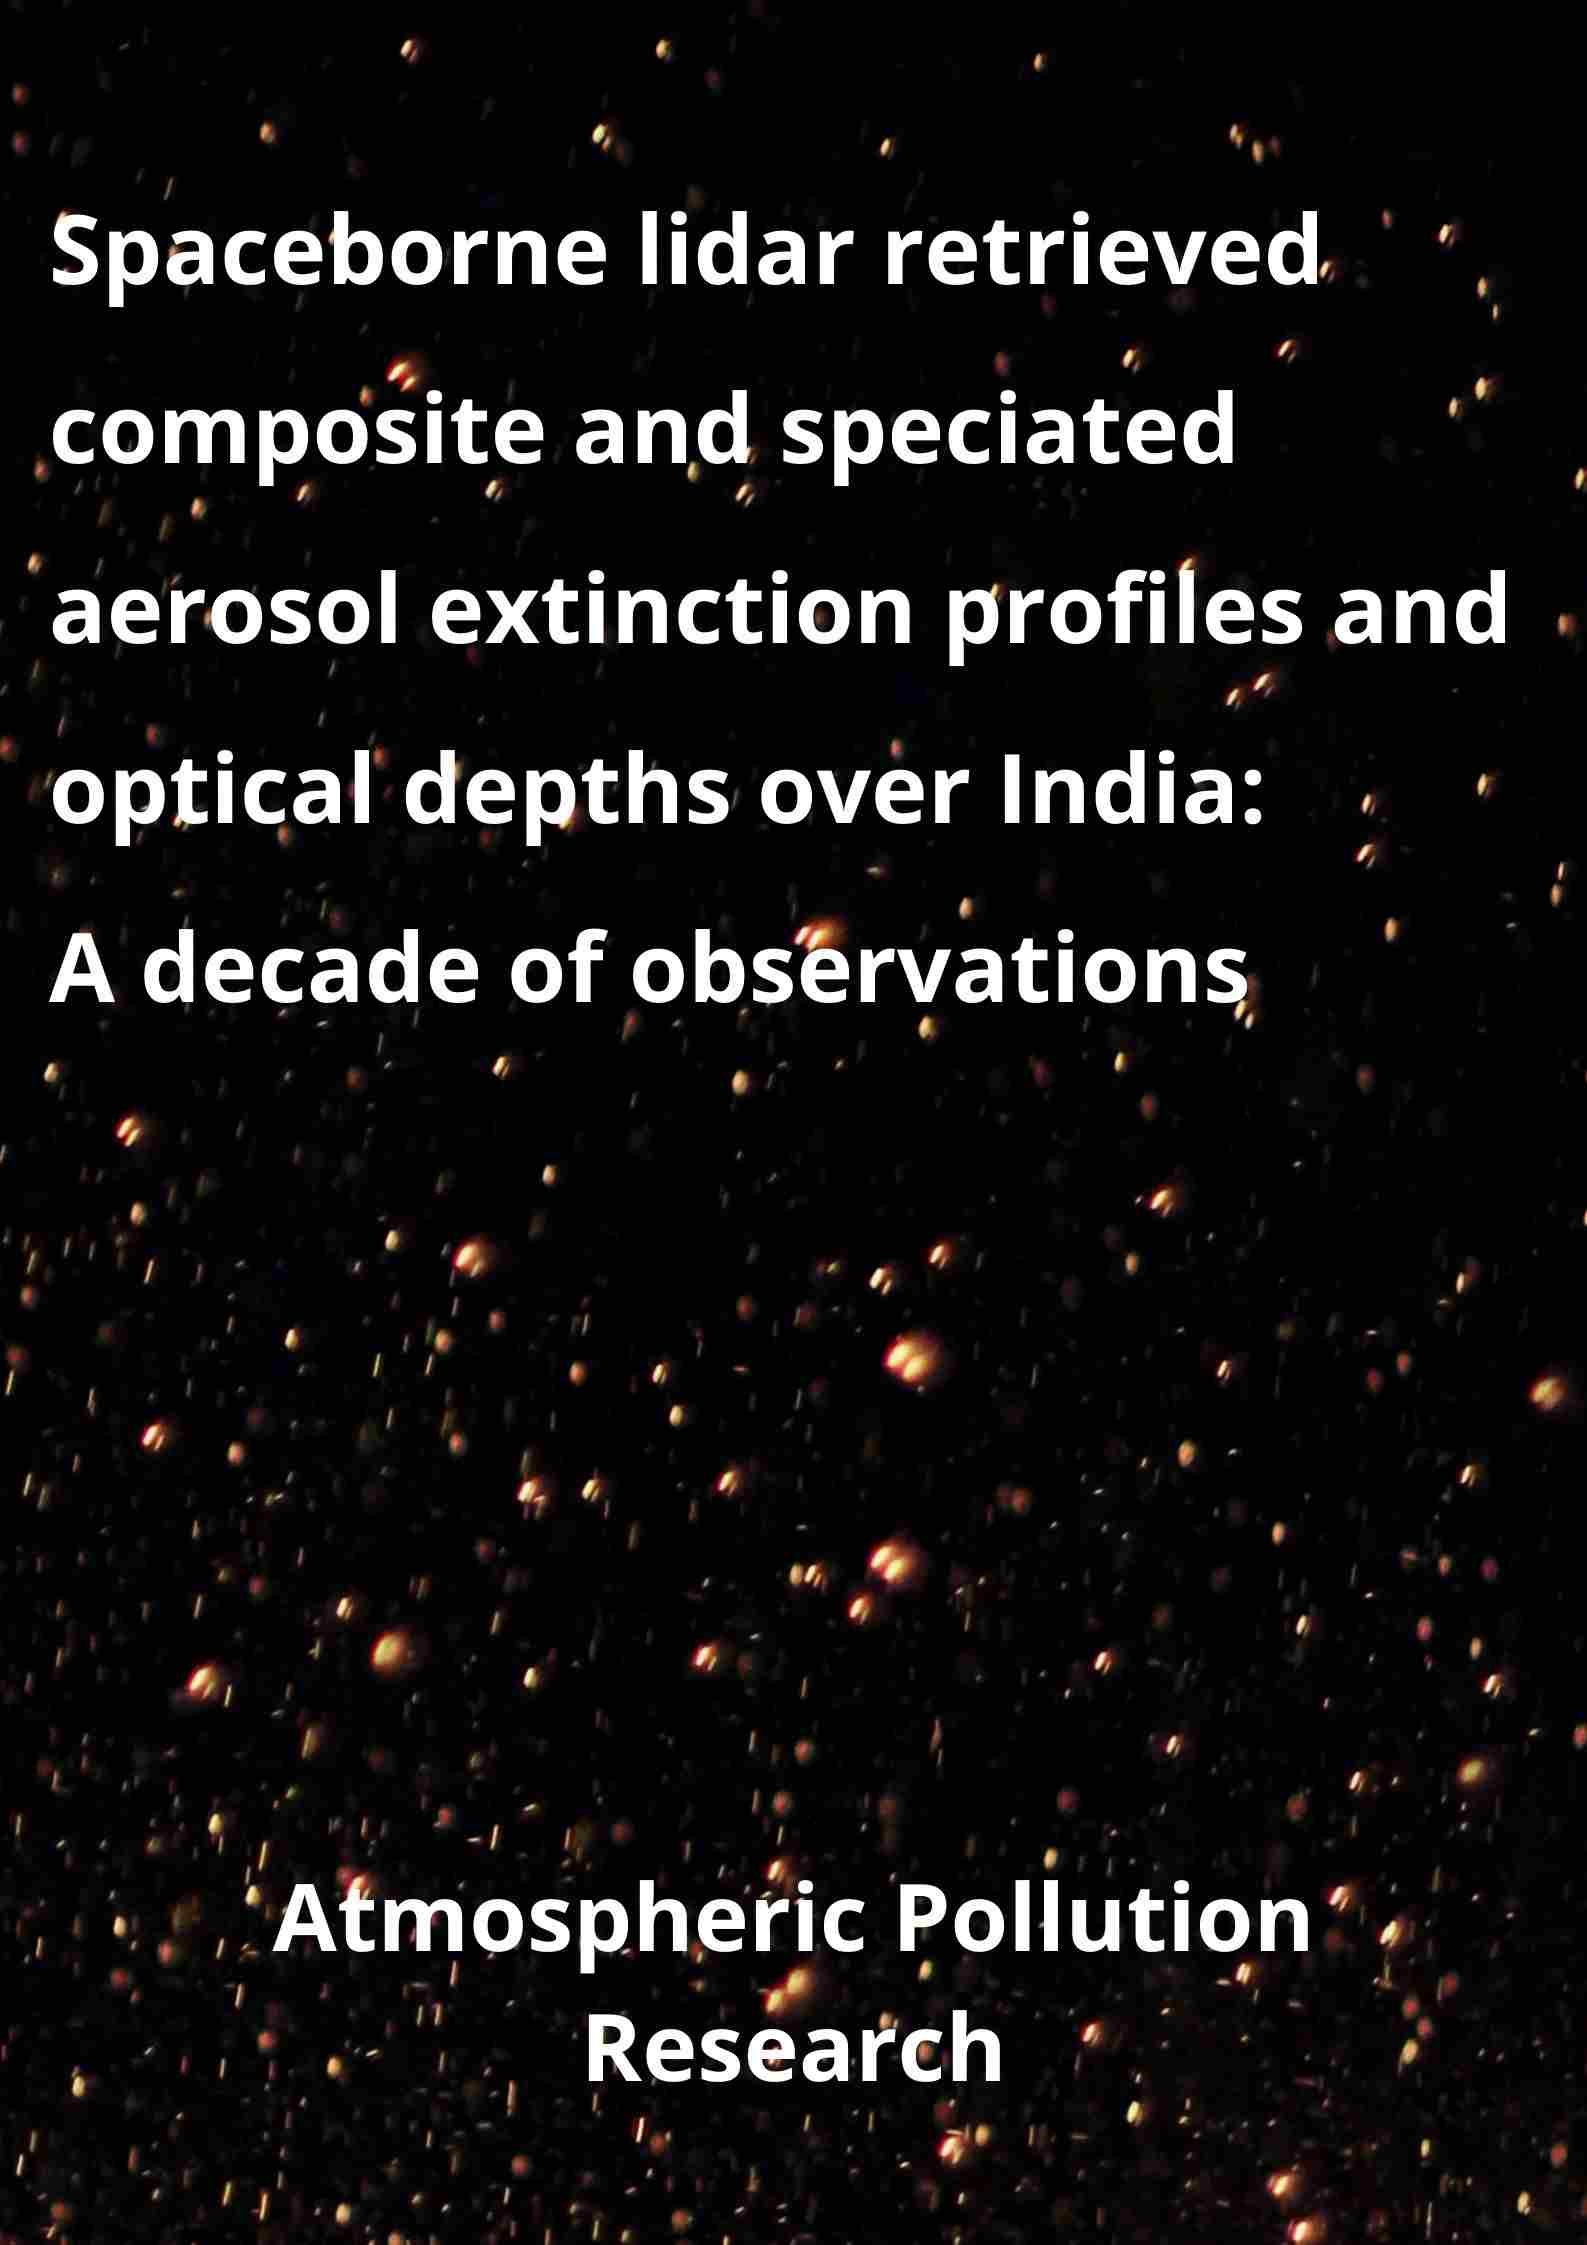 Spaceborne lidar retrieved composite and speciated aerosol extinction profiles and optical depths over India: A decade of observations